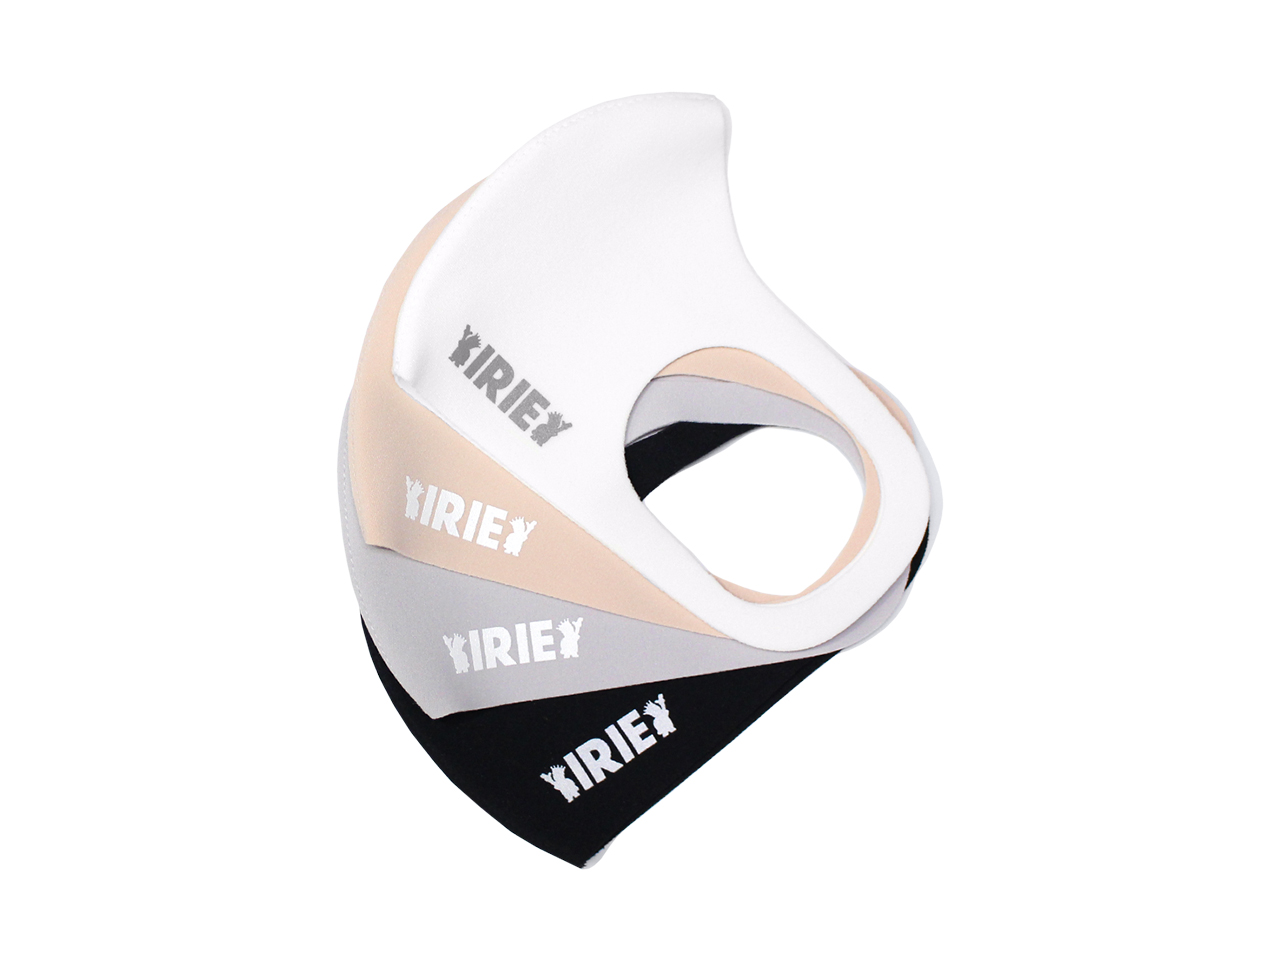 IRIE FACE MASK 【Msize】 - IRIE by irielife